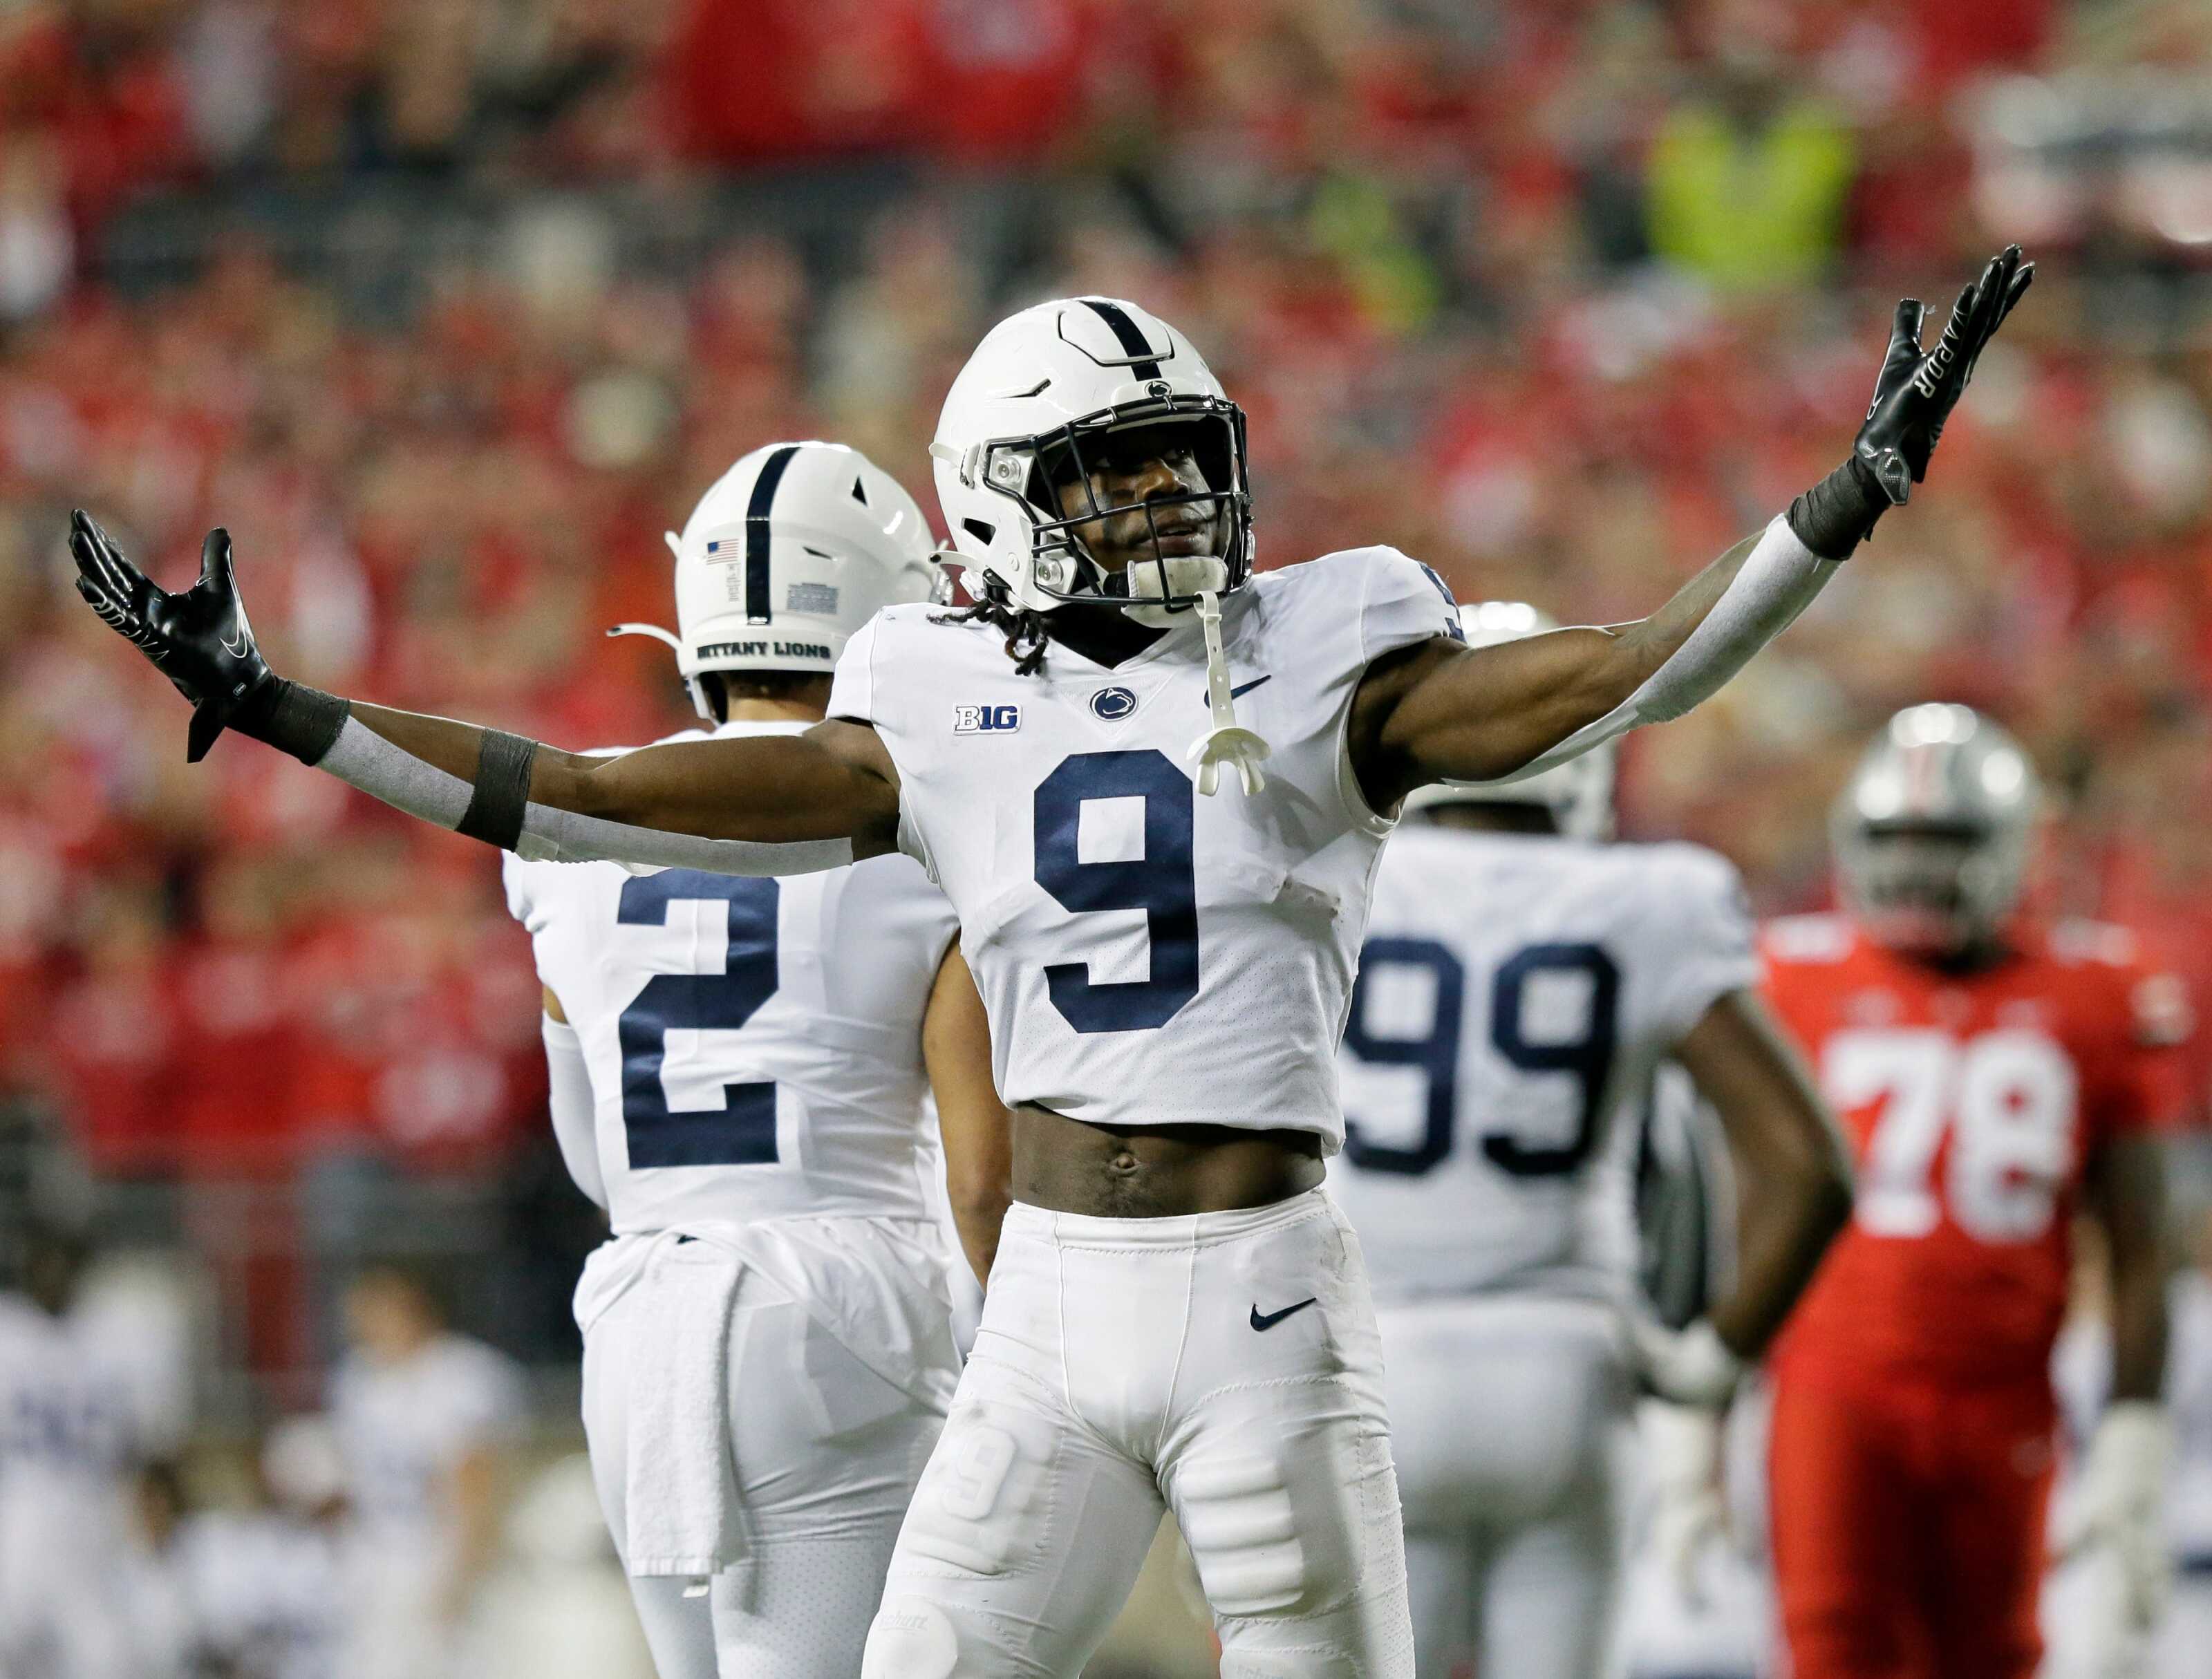 Penn State Game Saturday Penn State vs Maryland Odds, Injury Report, Prediction, Schedule, Live Stream and TV Channel for Week 10 College Football Game